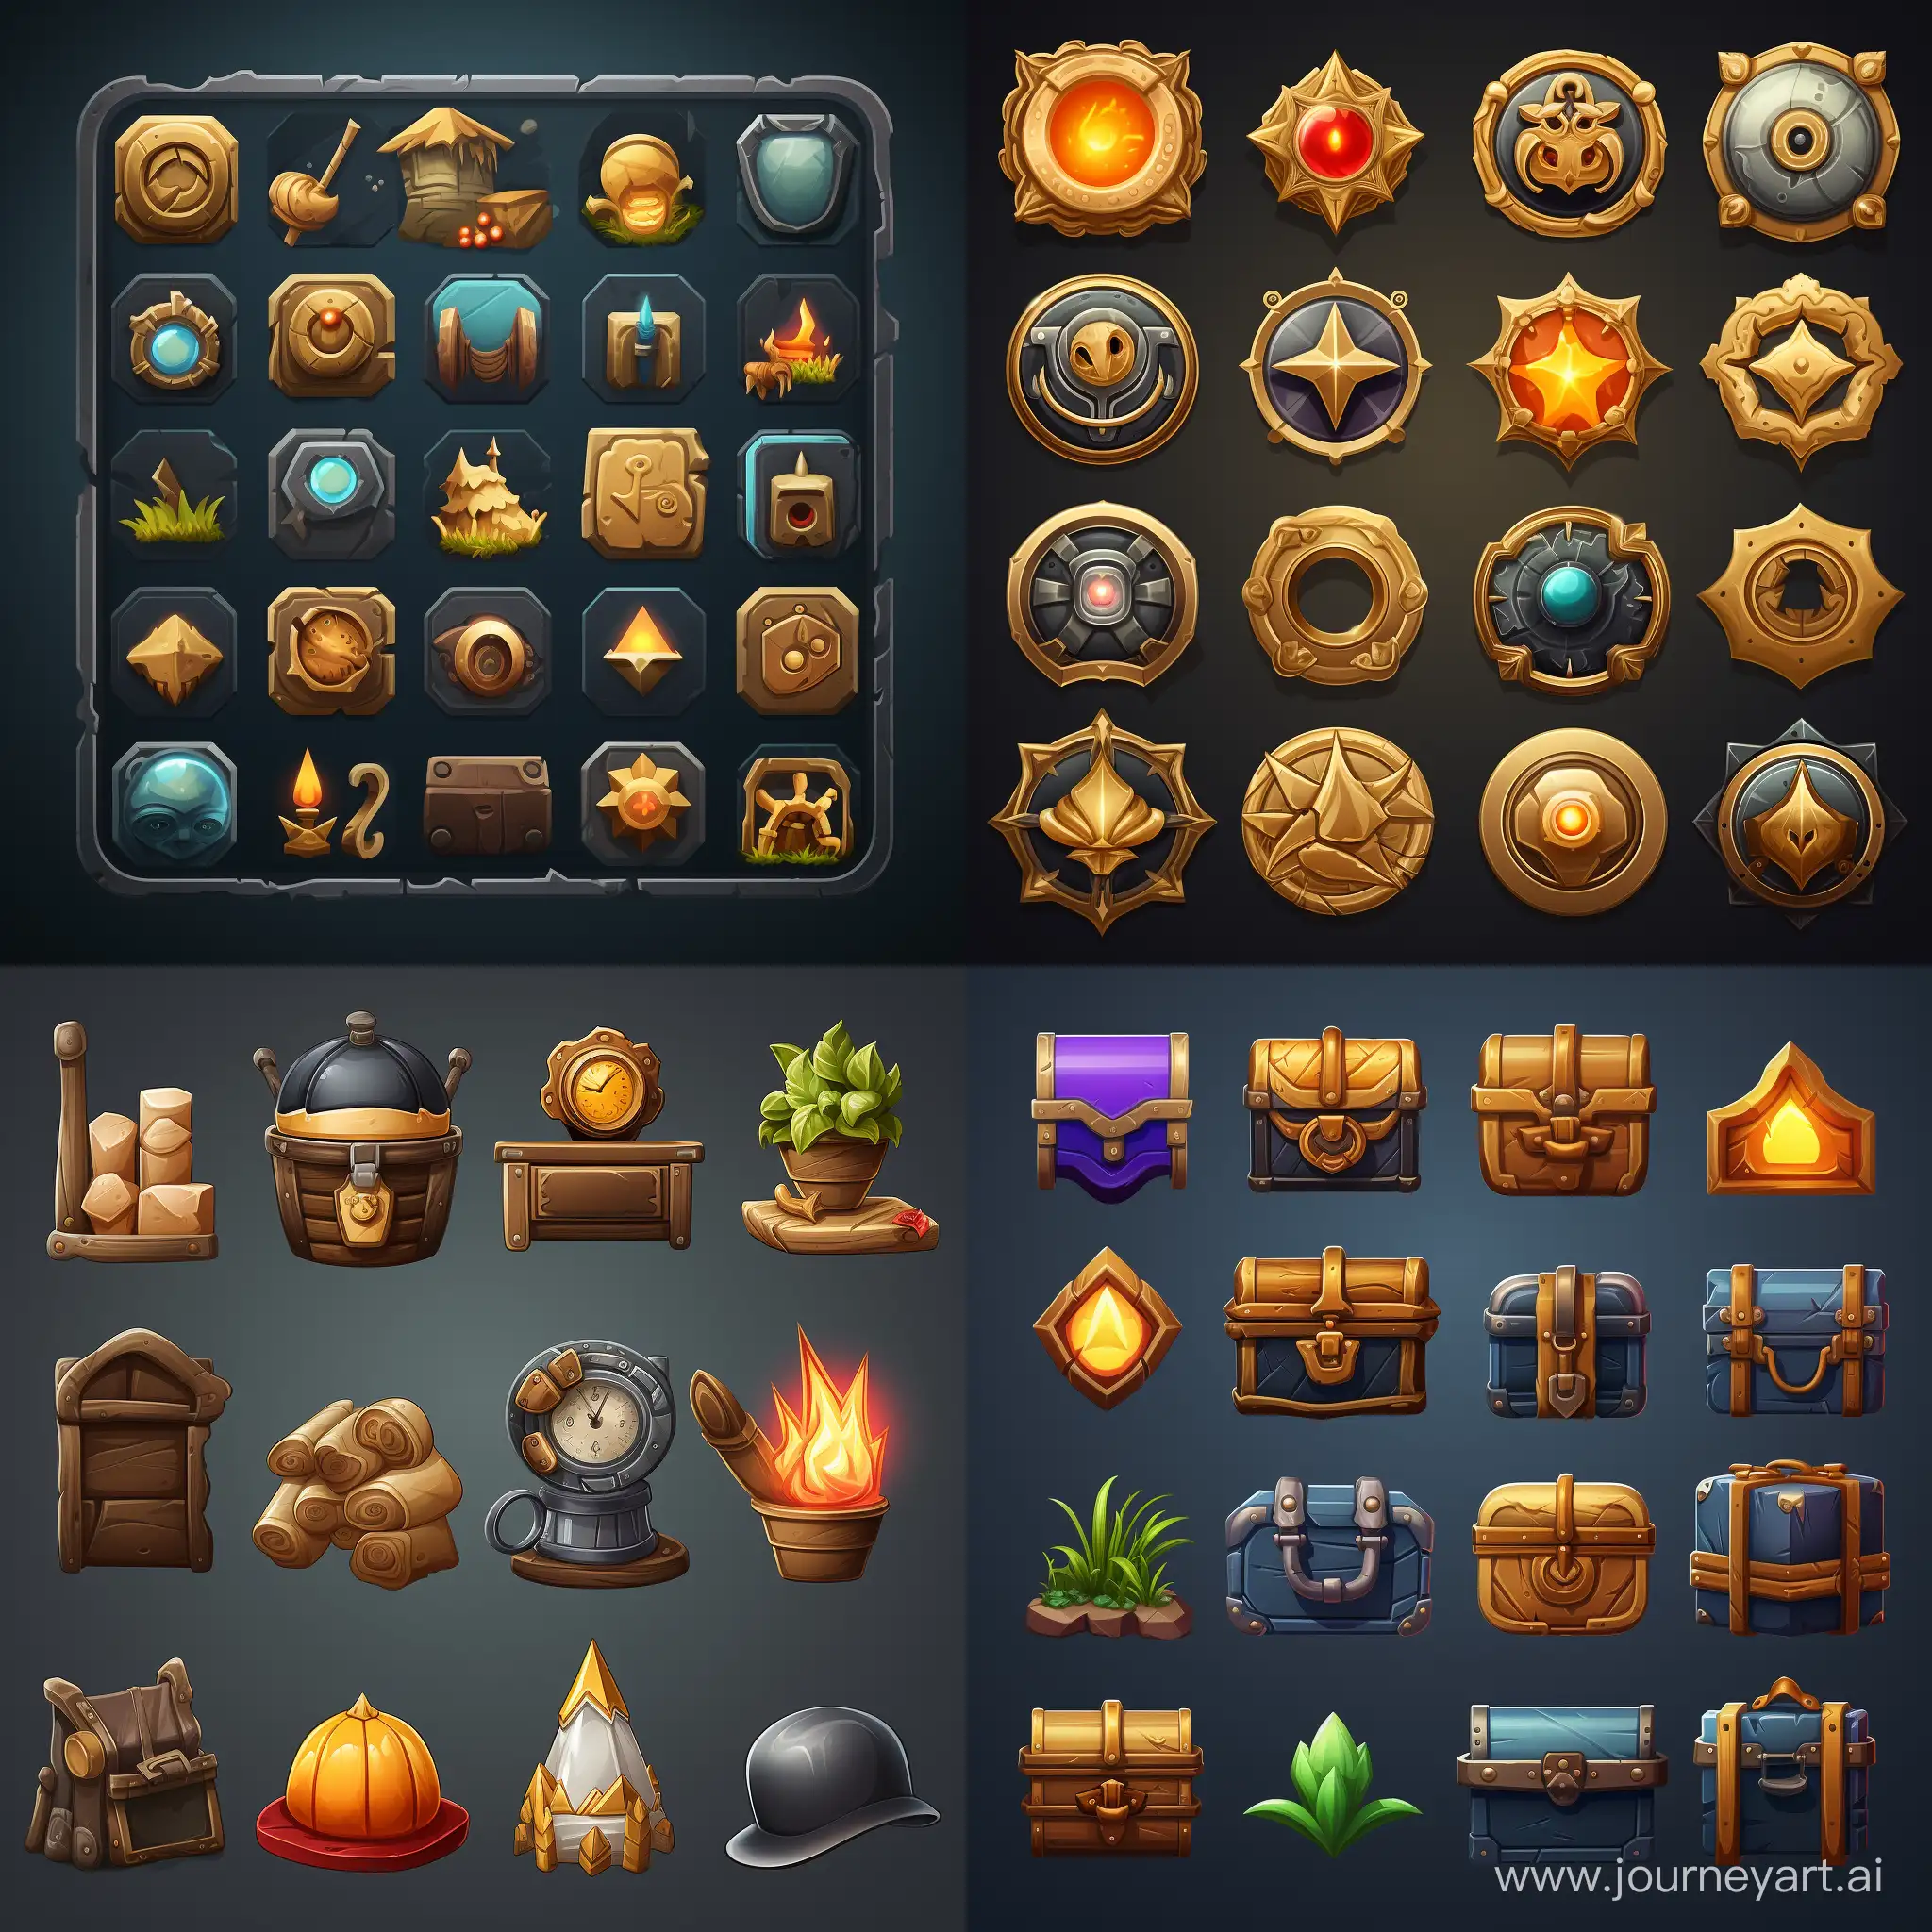 Custom-2D-Game-Icons-Objects-Assets-and-UI-Design-AR-11-No-9280